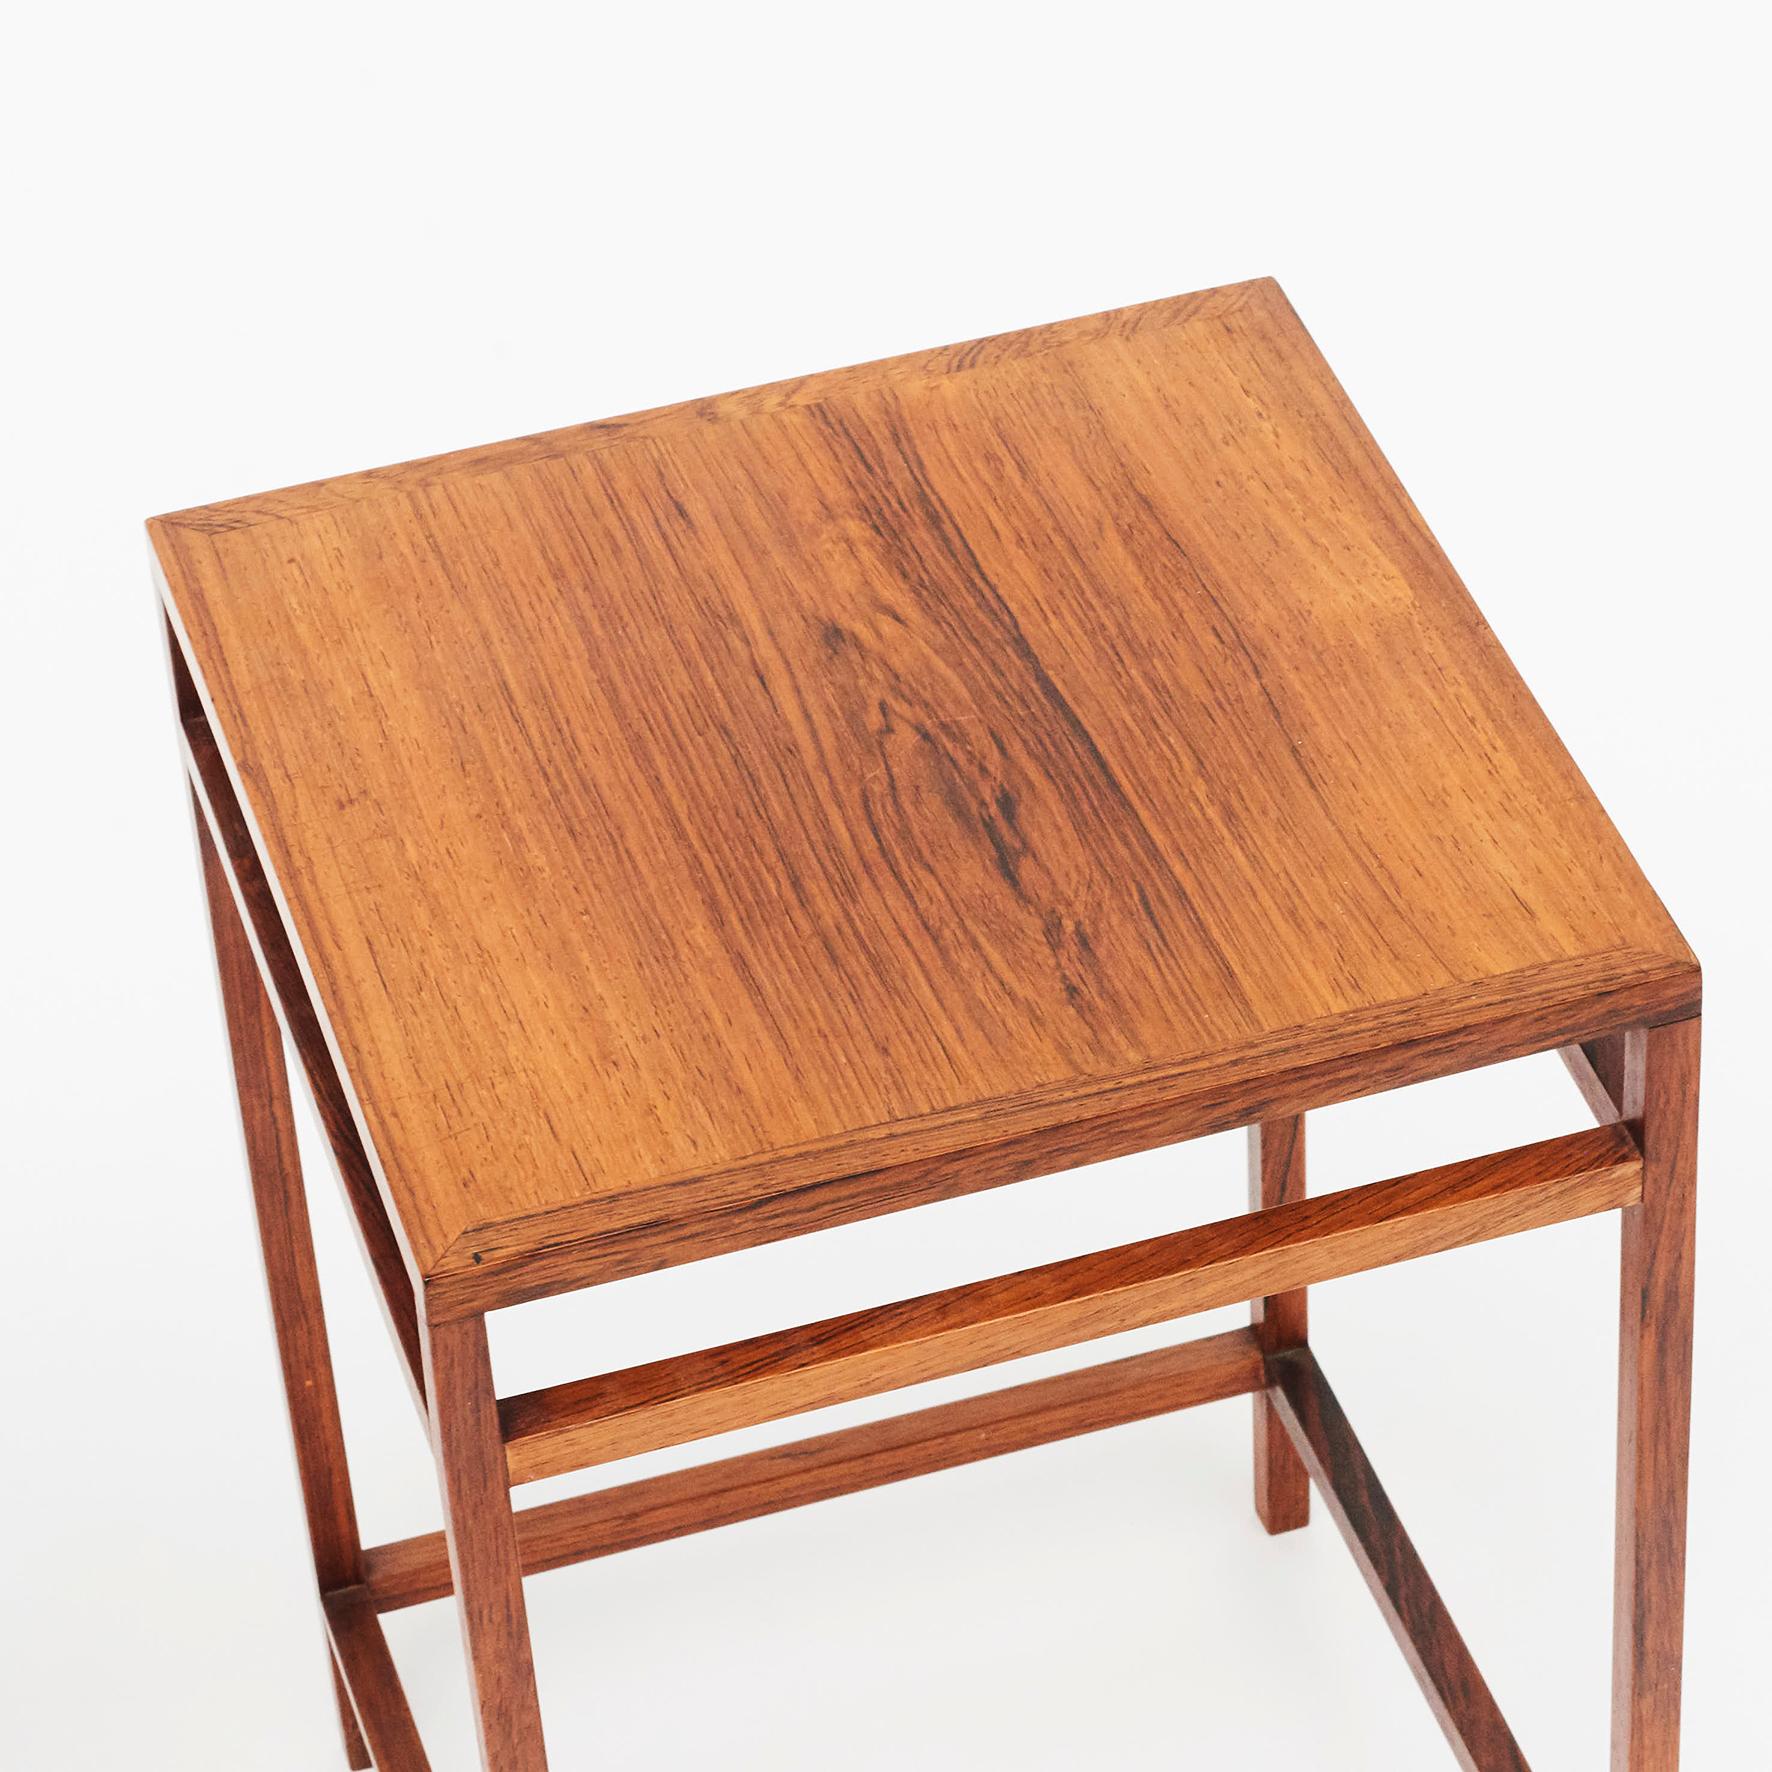 Pair of rectangular side table in rosewood designed by Aksel Bender Madsen for Willy Beck Cabinet Makers Copenhagen.
Made in Denmark in the 1950s.
Great original condition.